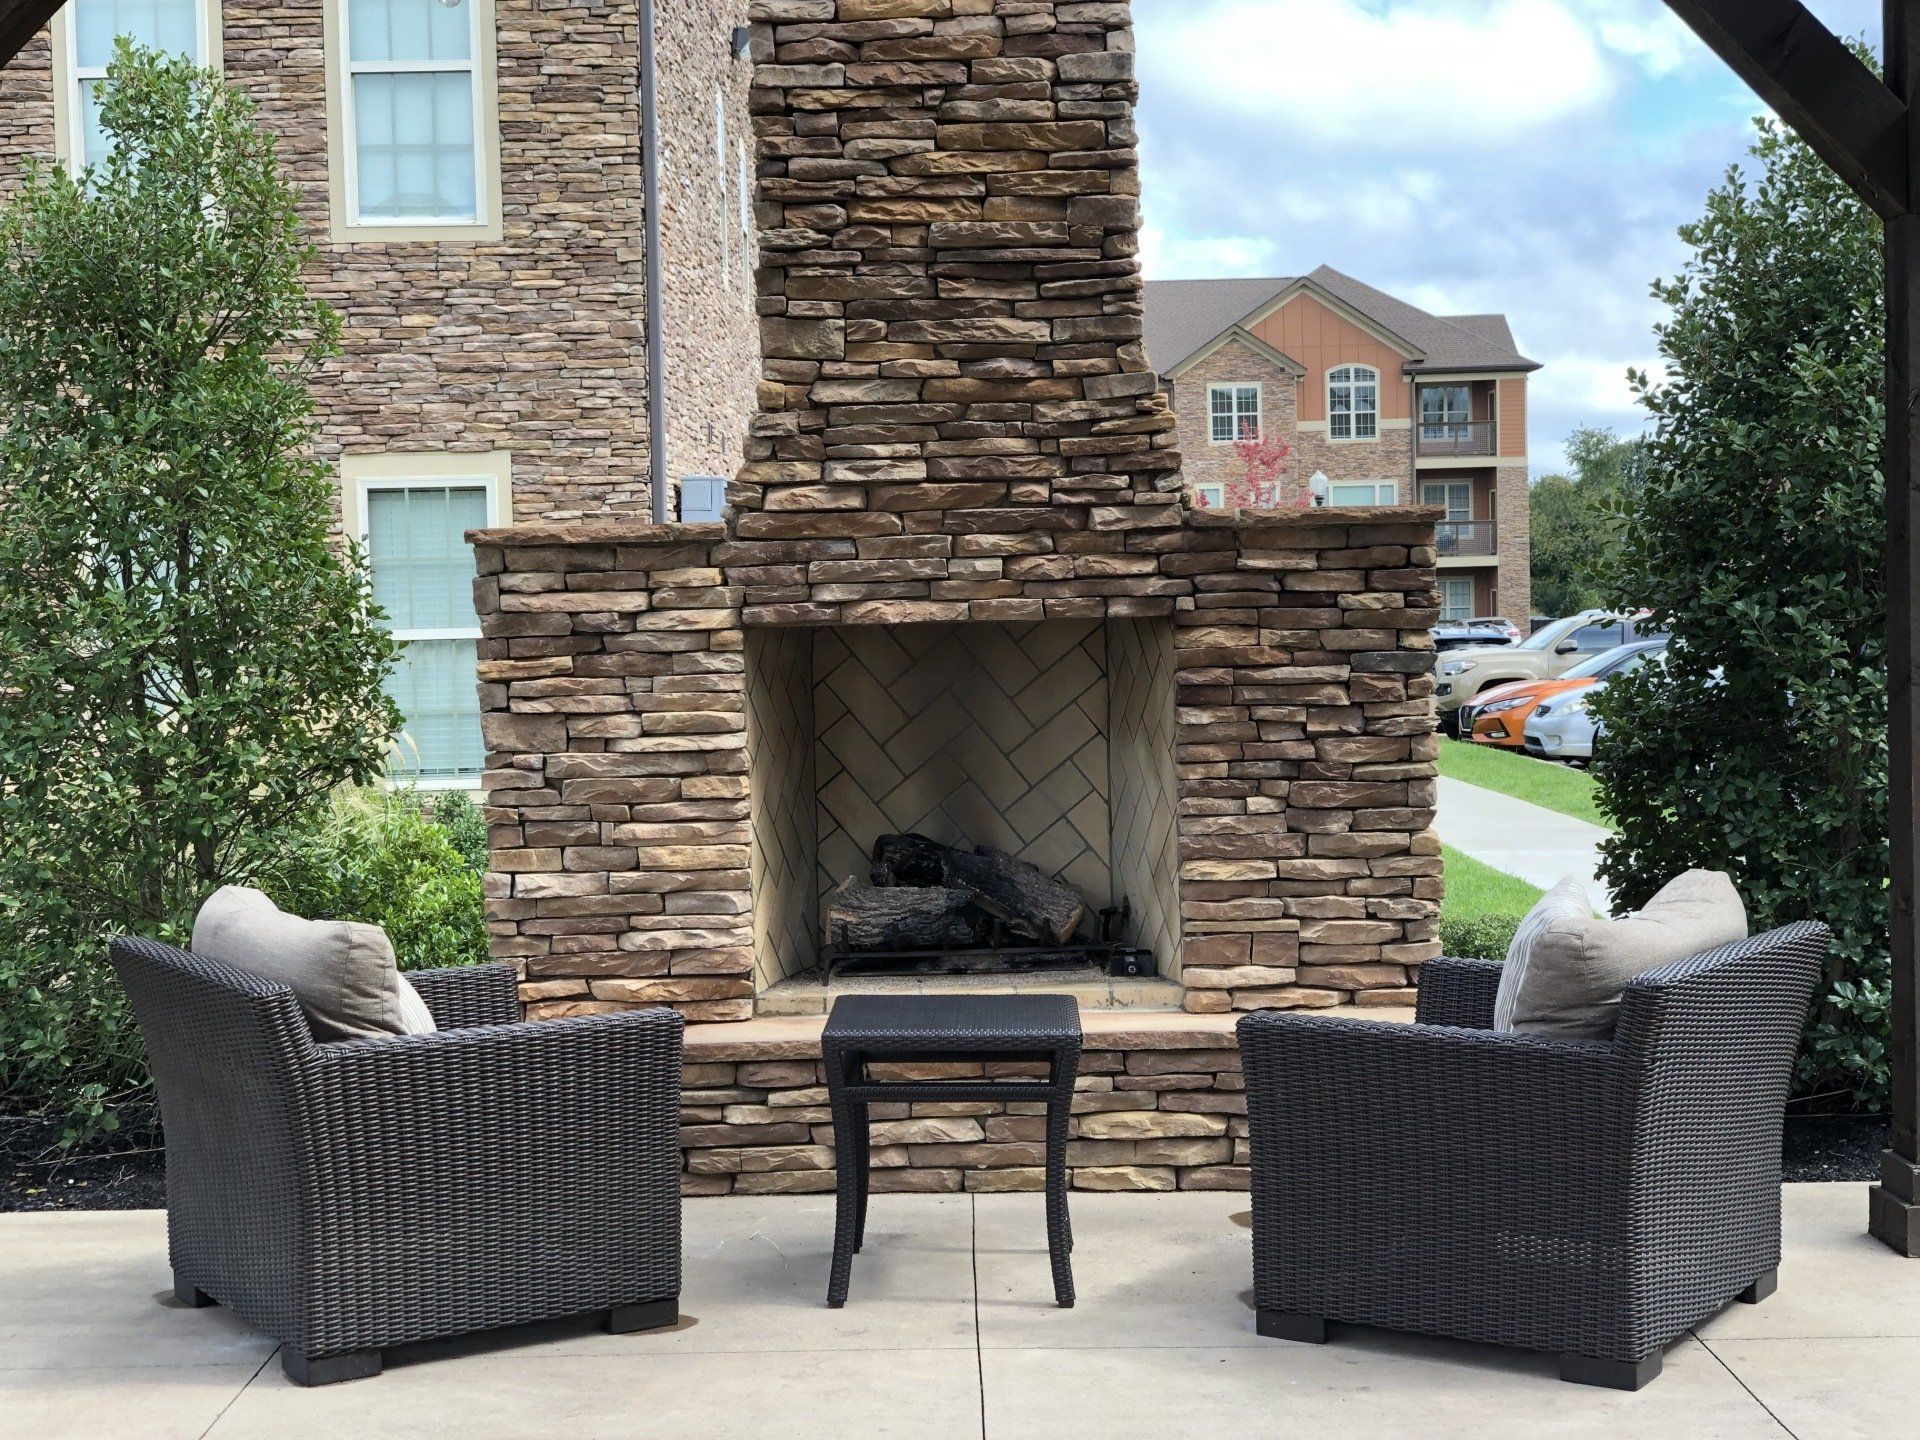 Exterior of fireplace lounge area